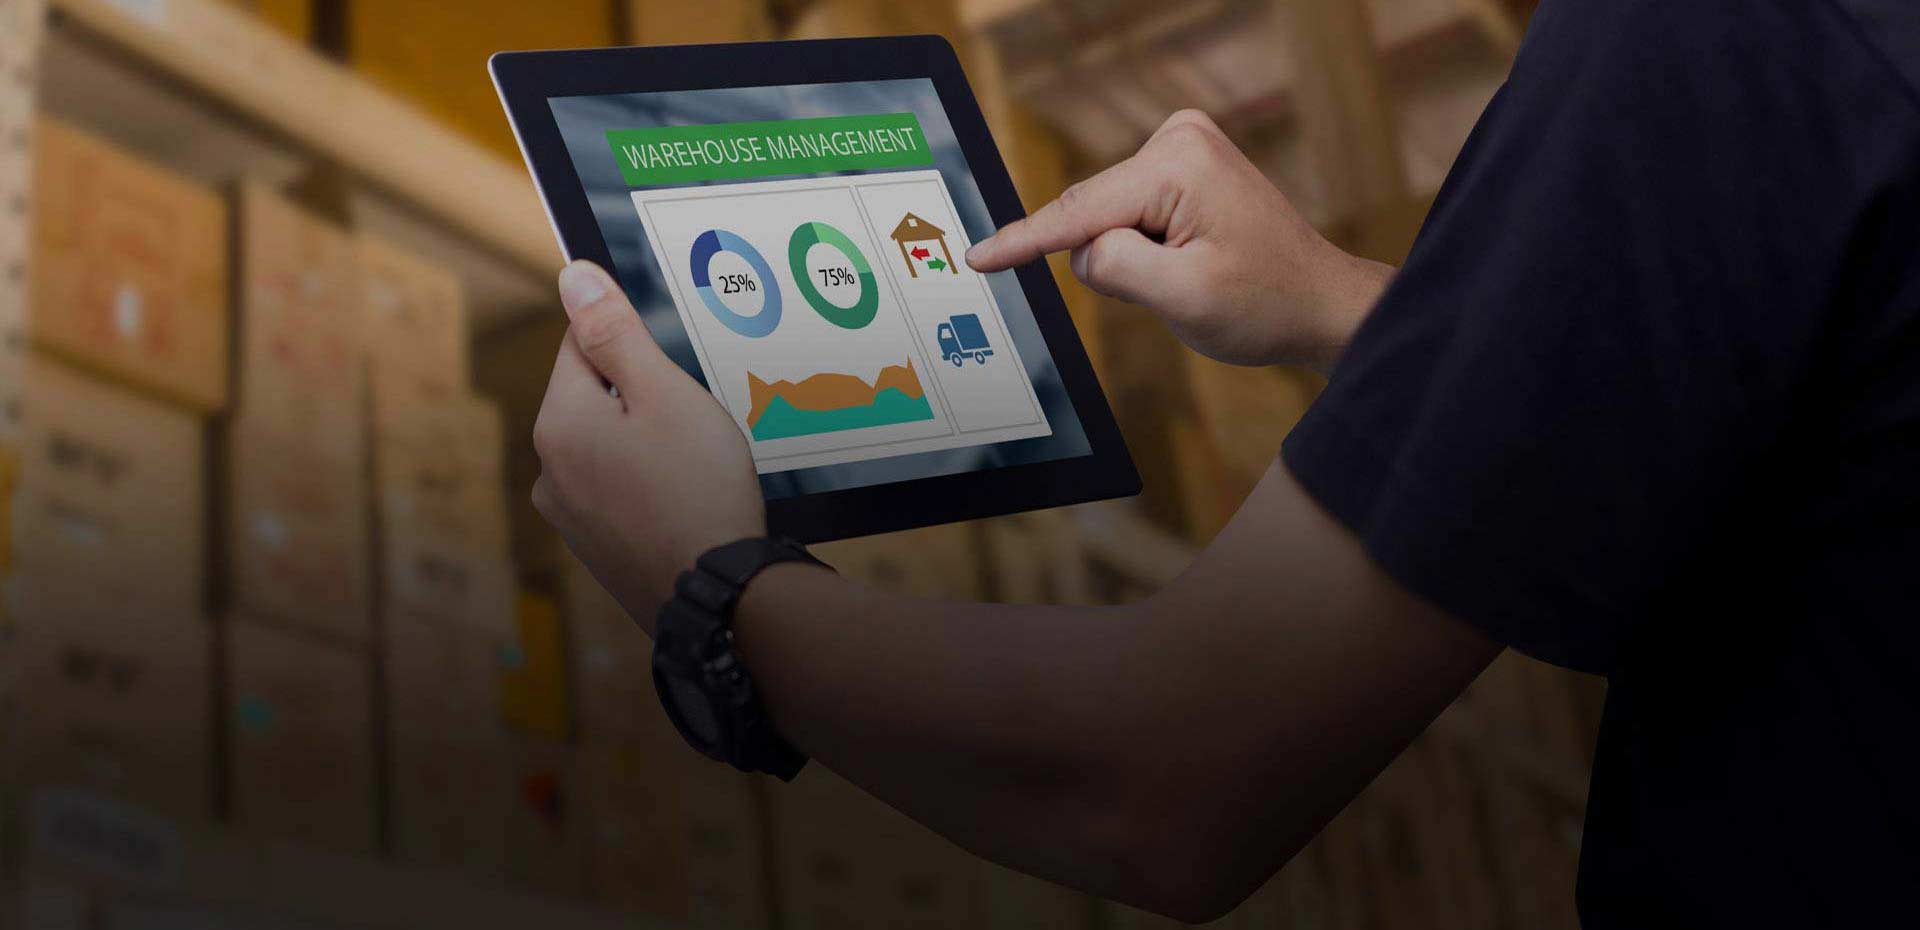 A North American Ecommerce and Warehousing company helps its customers improve product offers and sales, through pricing intelligence solutions for 10,000 SKUs Banner